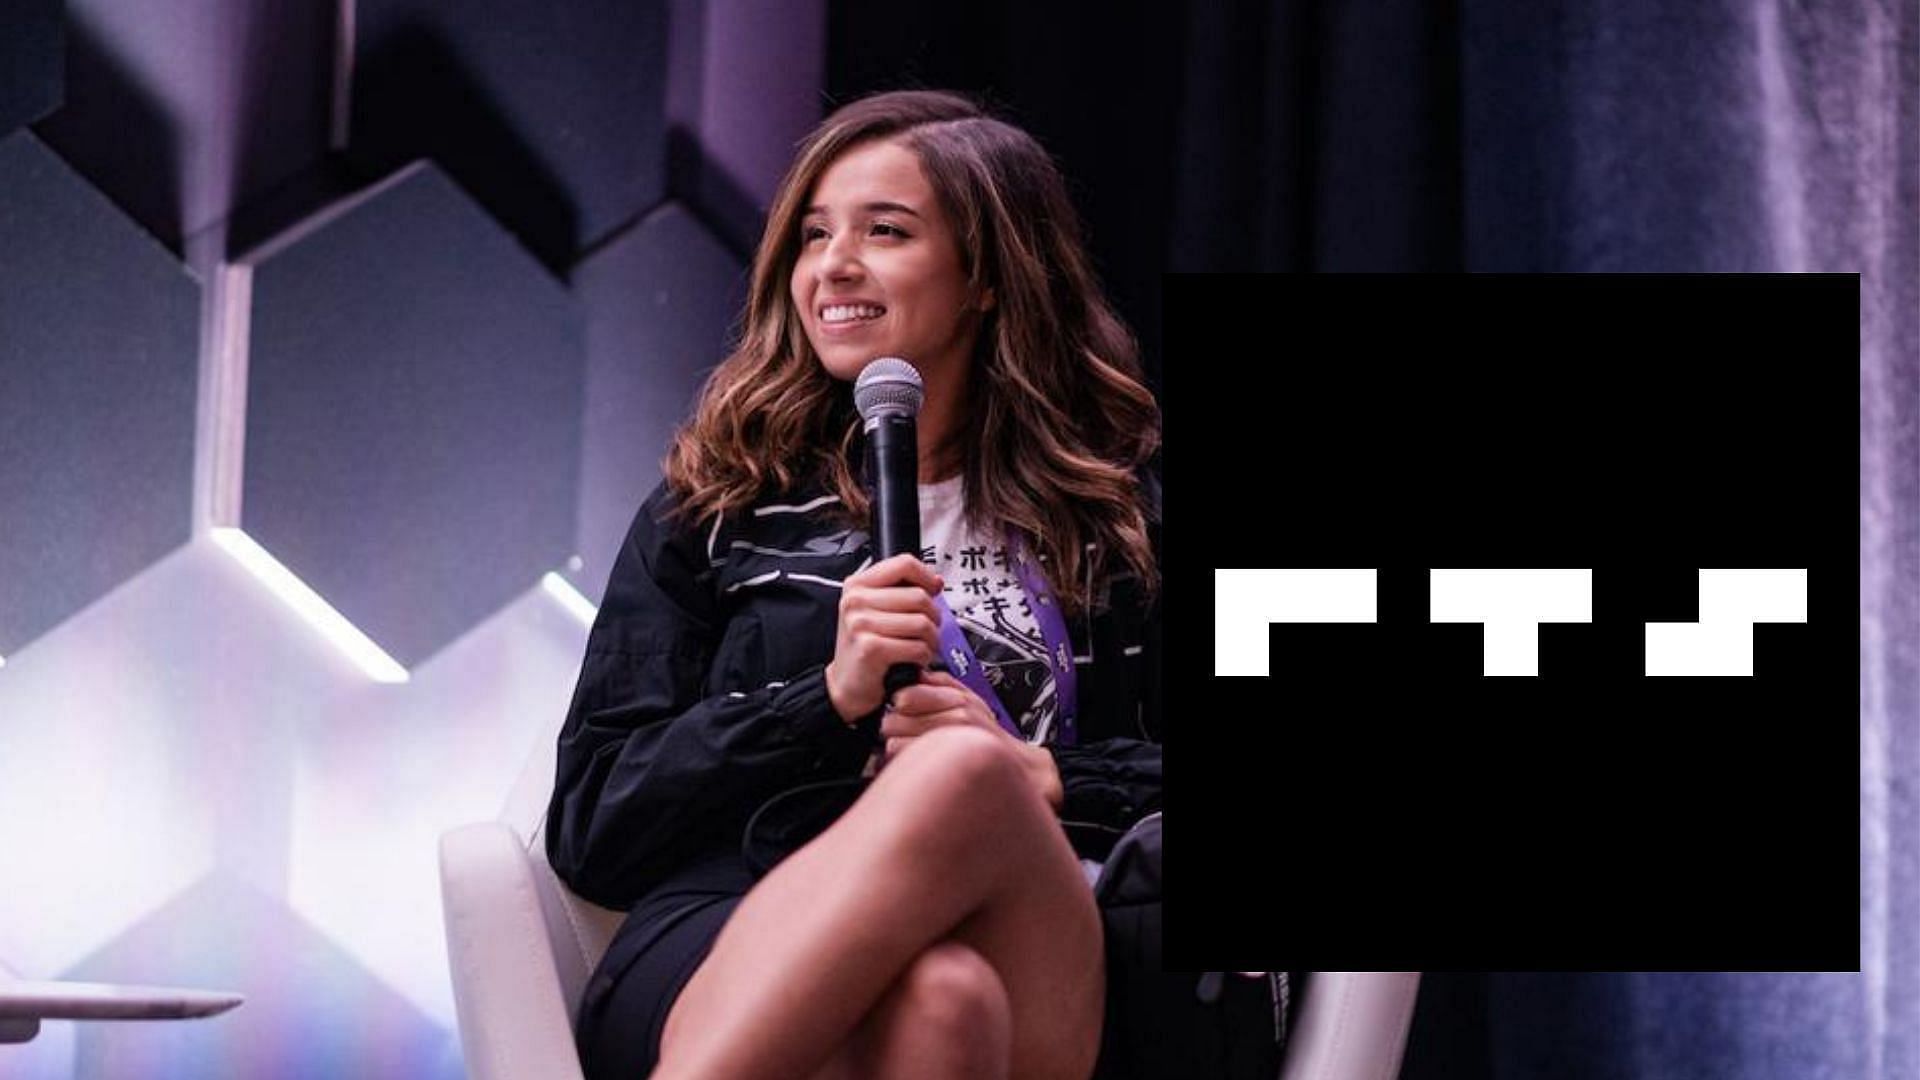 Pokimane was announced as the co-owner of RTS on October 27, 2021 (Image via Sportskeeda)